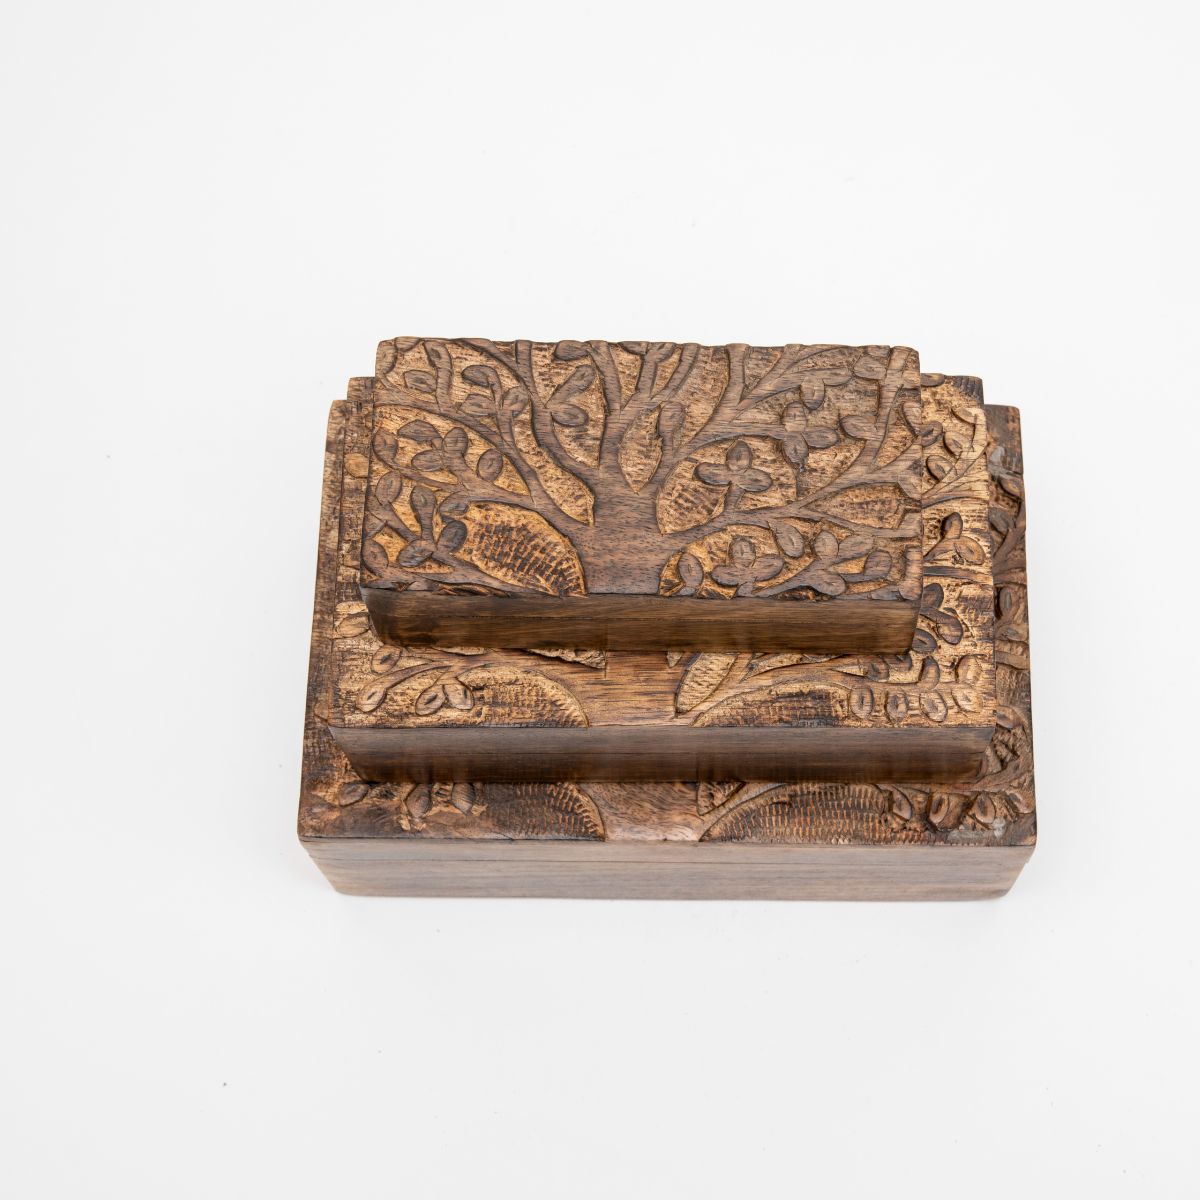 Set of 3 Keepsake Boxes with Tree of Life Carvings